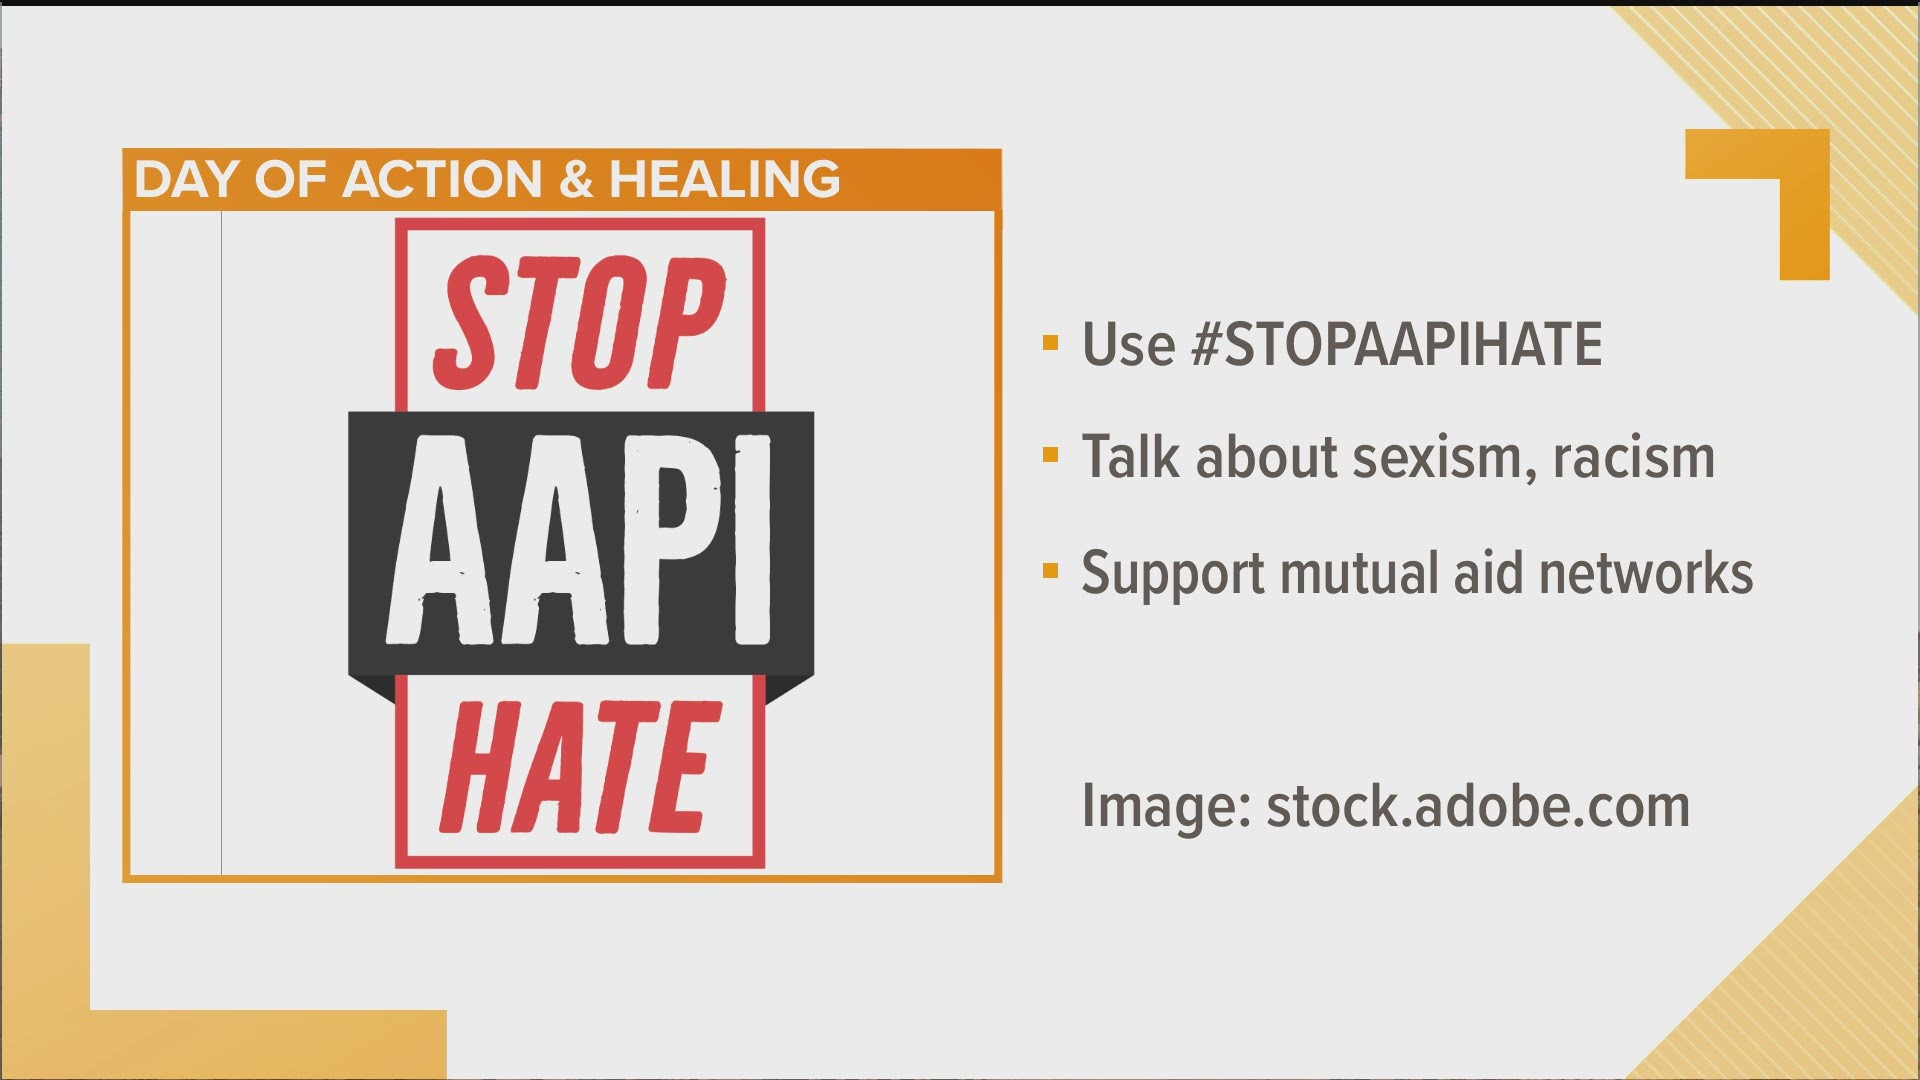 Friday, March 26 is a virtual day of action and healing to Stop AAPI Hate, with a worldwide vigil planned.